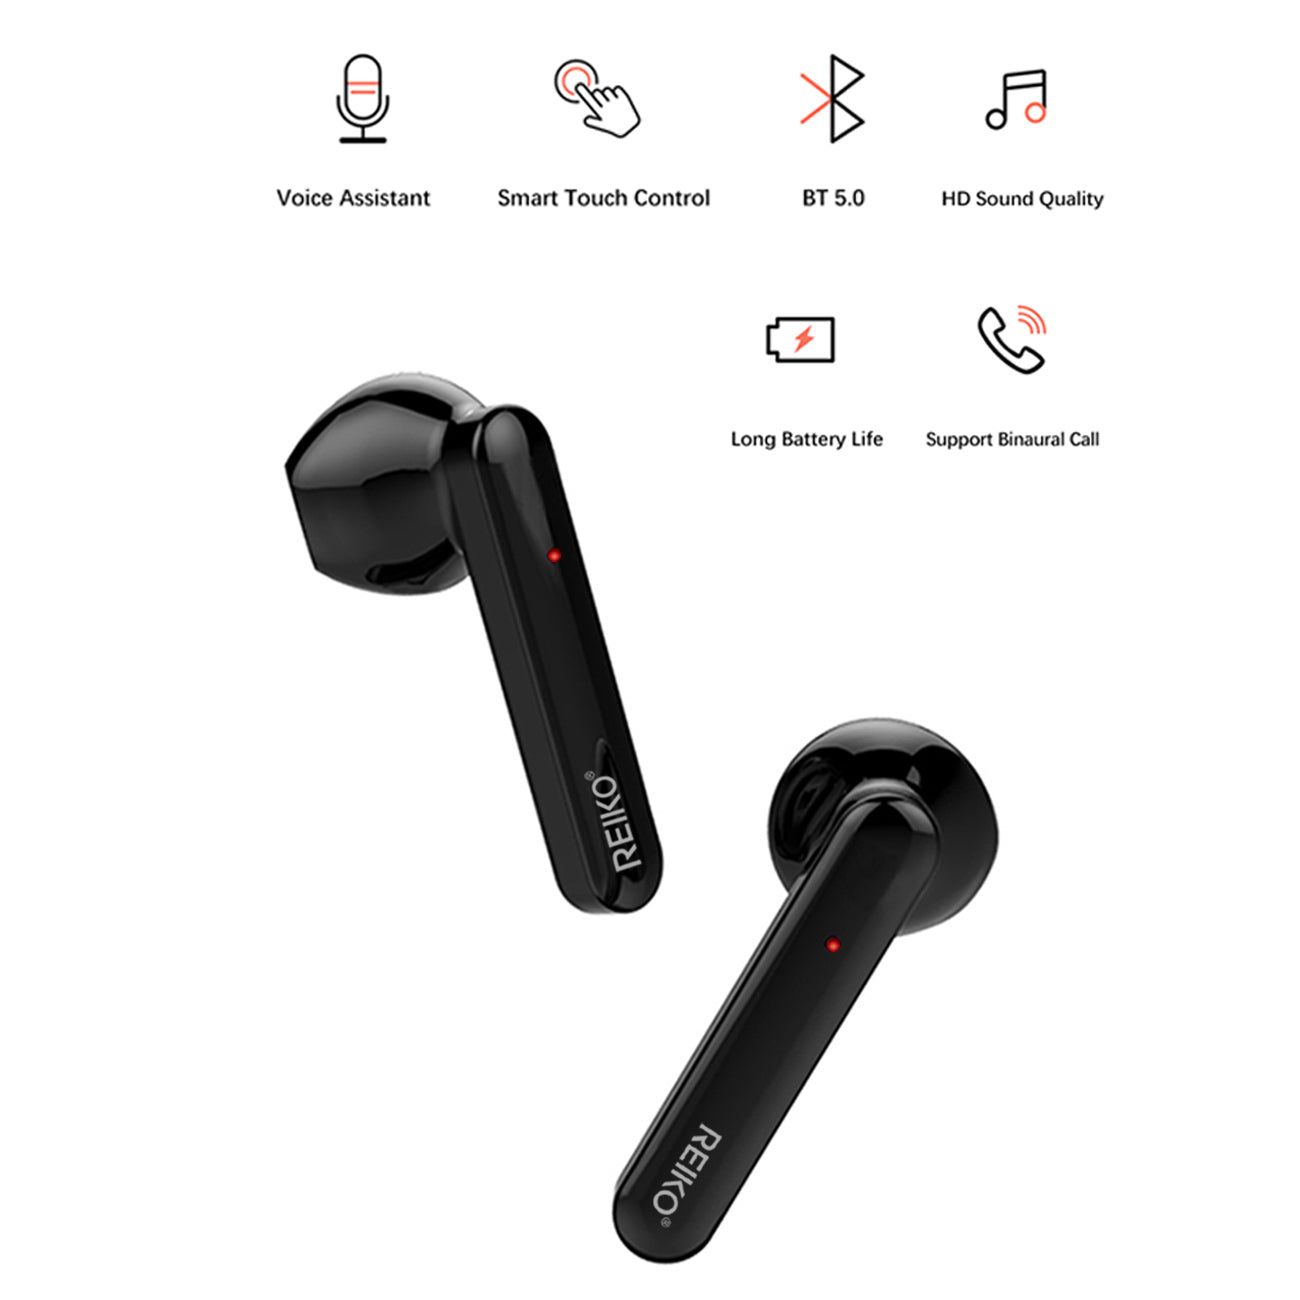 Wireless Earbuds with Charging Case Macaron Finishing In Black